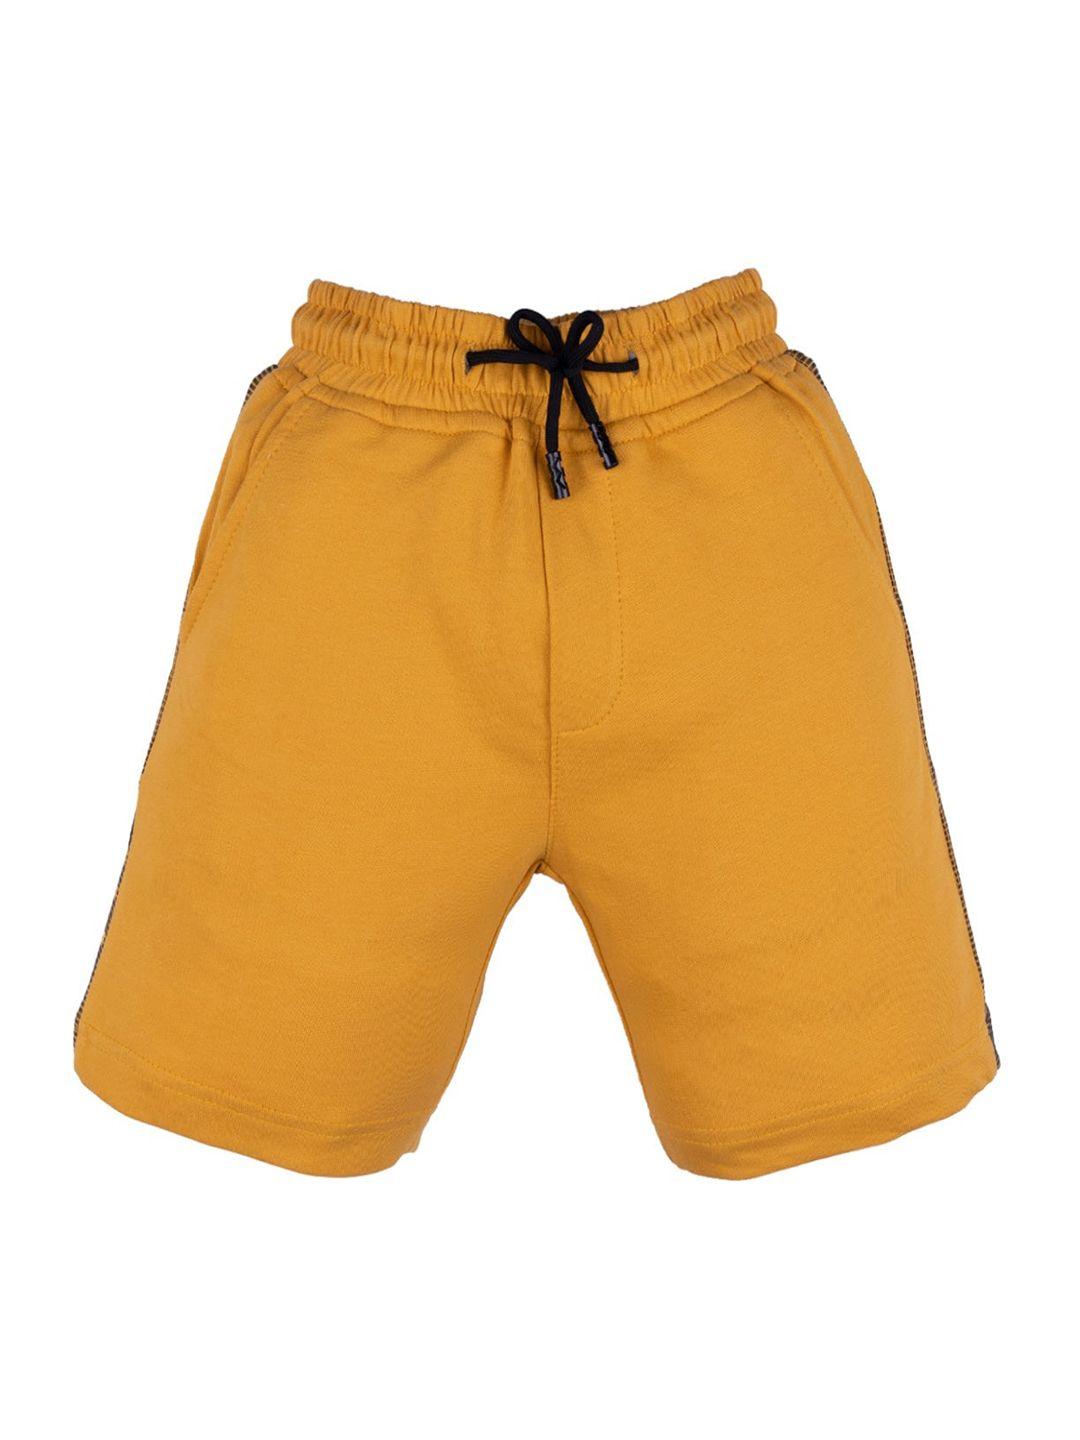 status quo boys gold-toned high-rise shorts